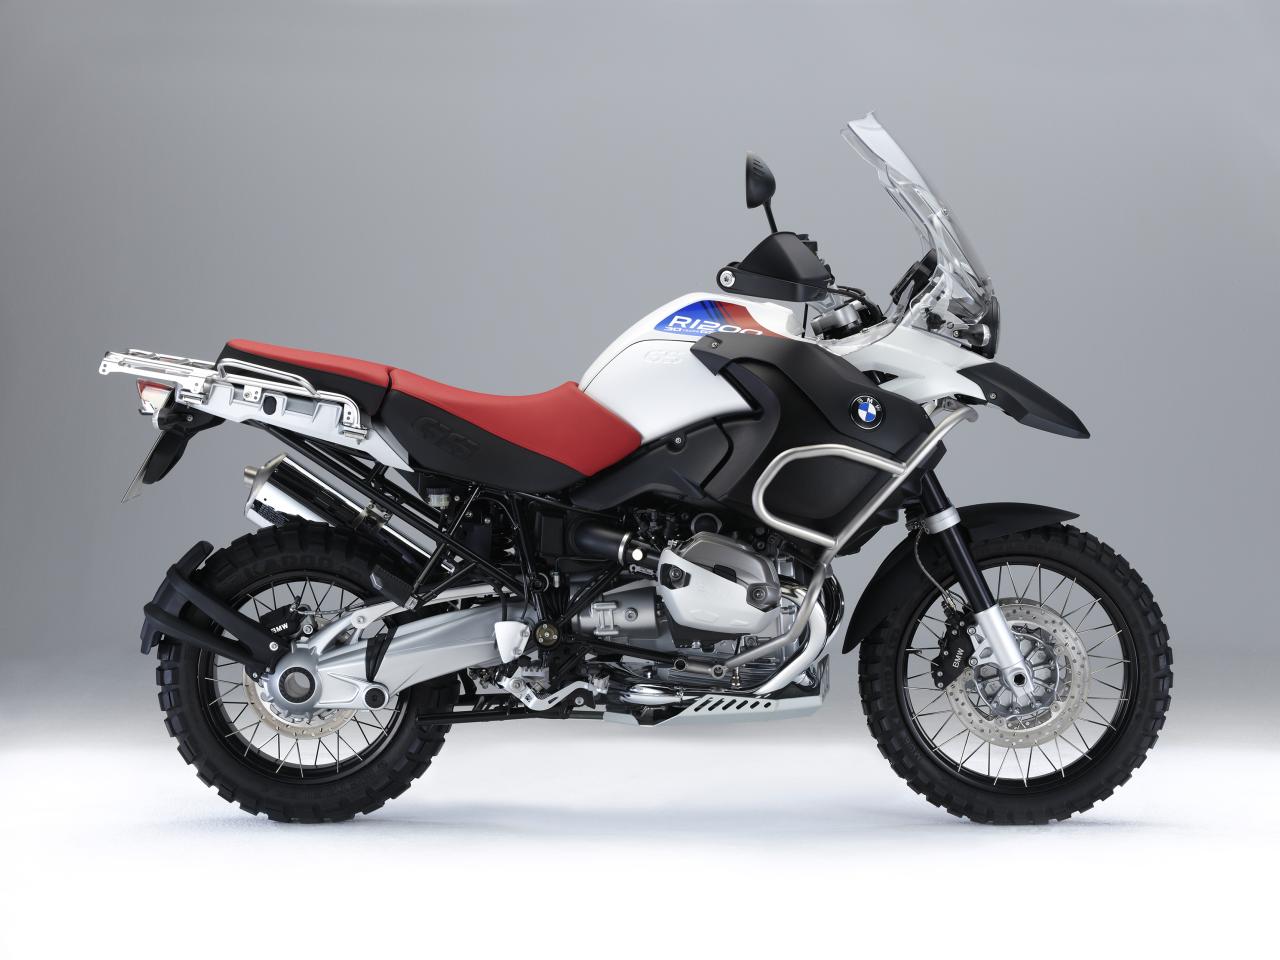 Bmw r 1200 gs adventure 30 years special edition #2